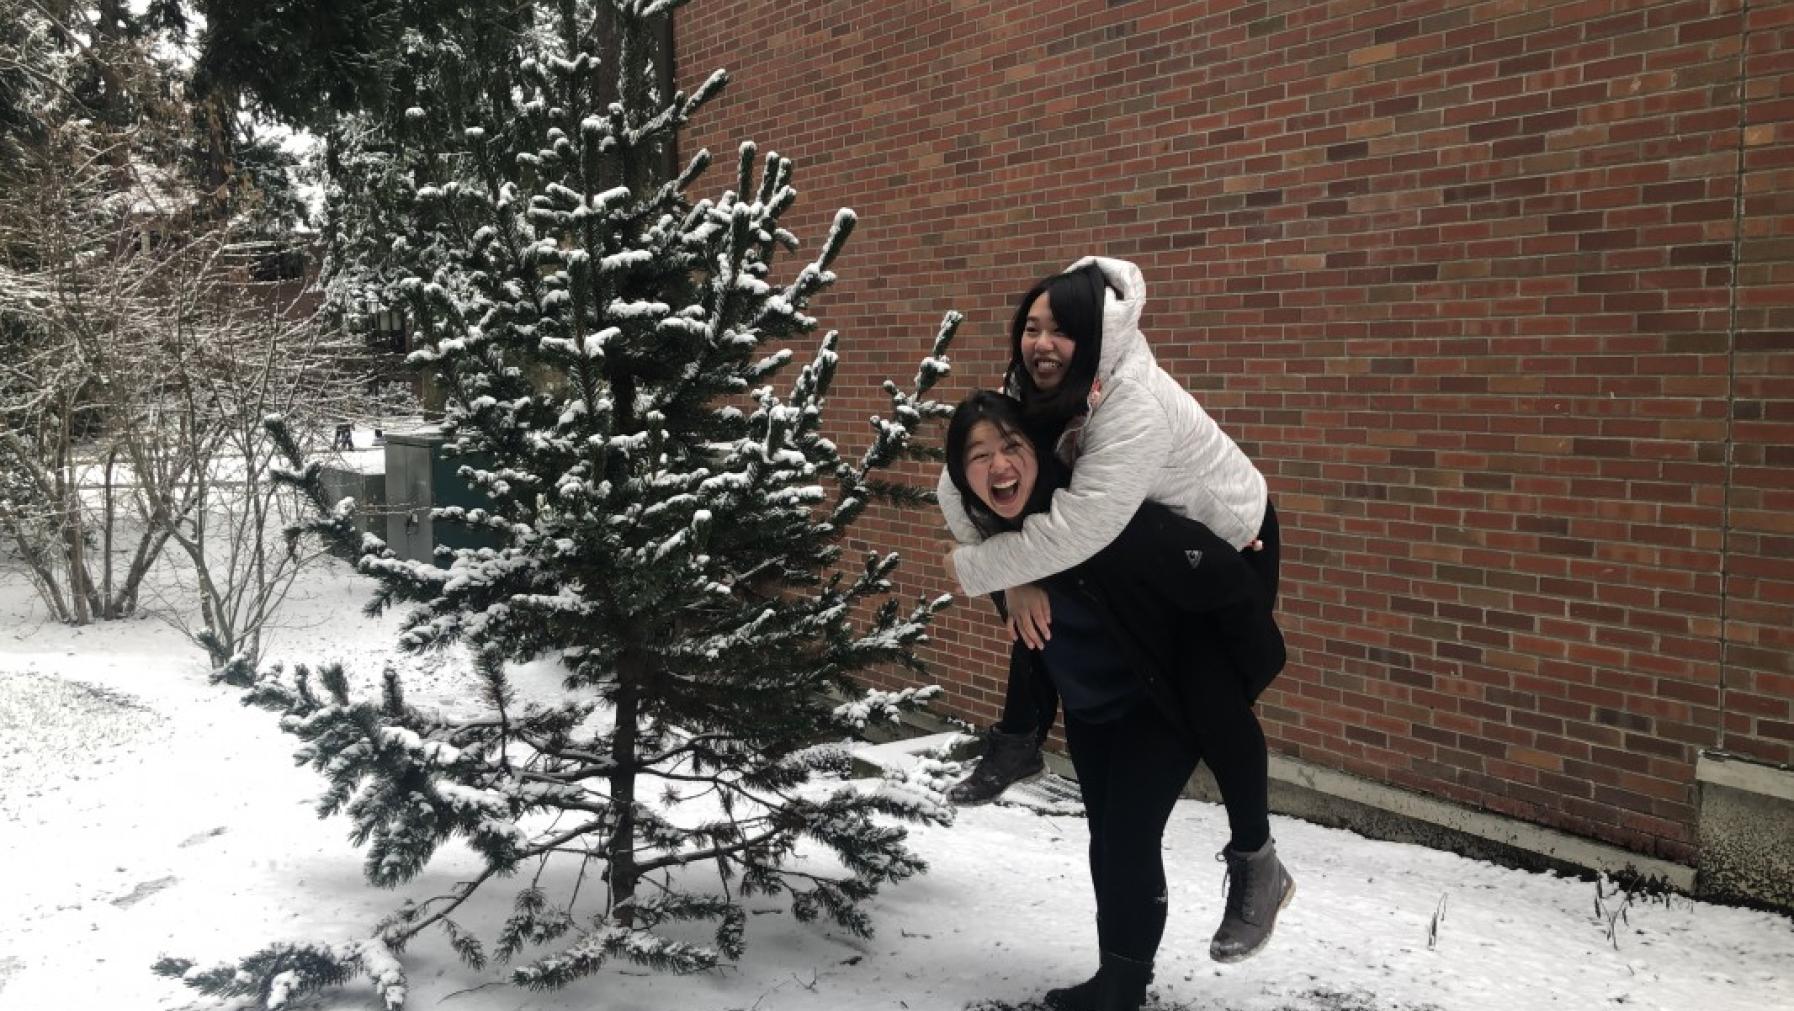 Two people in the snow in front of a tree.